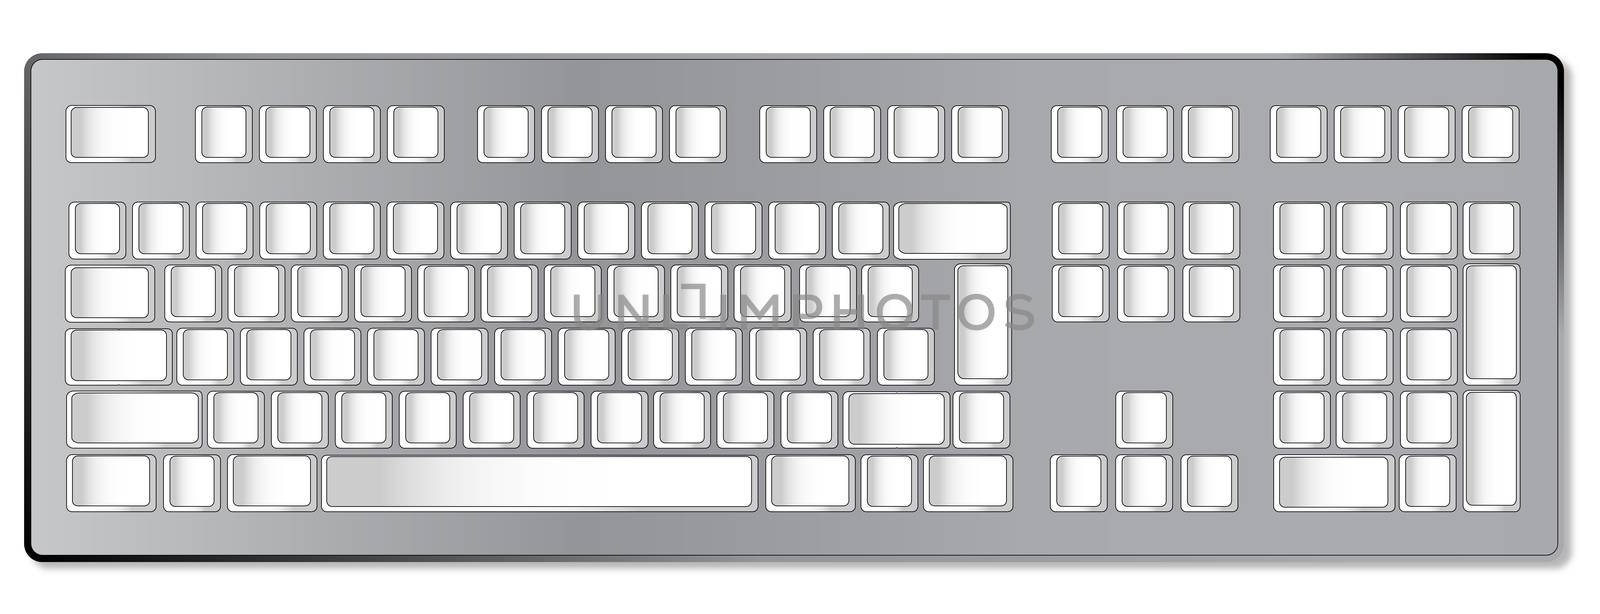 A computer keyboard with blank keys ready for personal shortcuts or tect